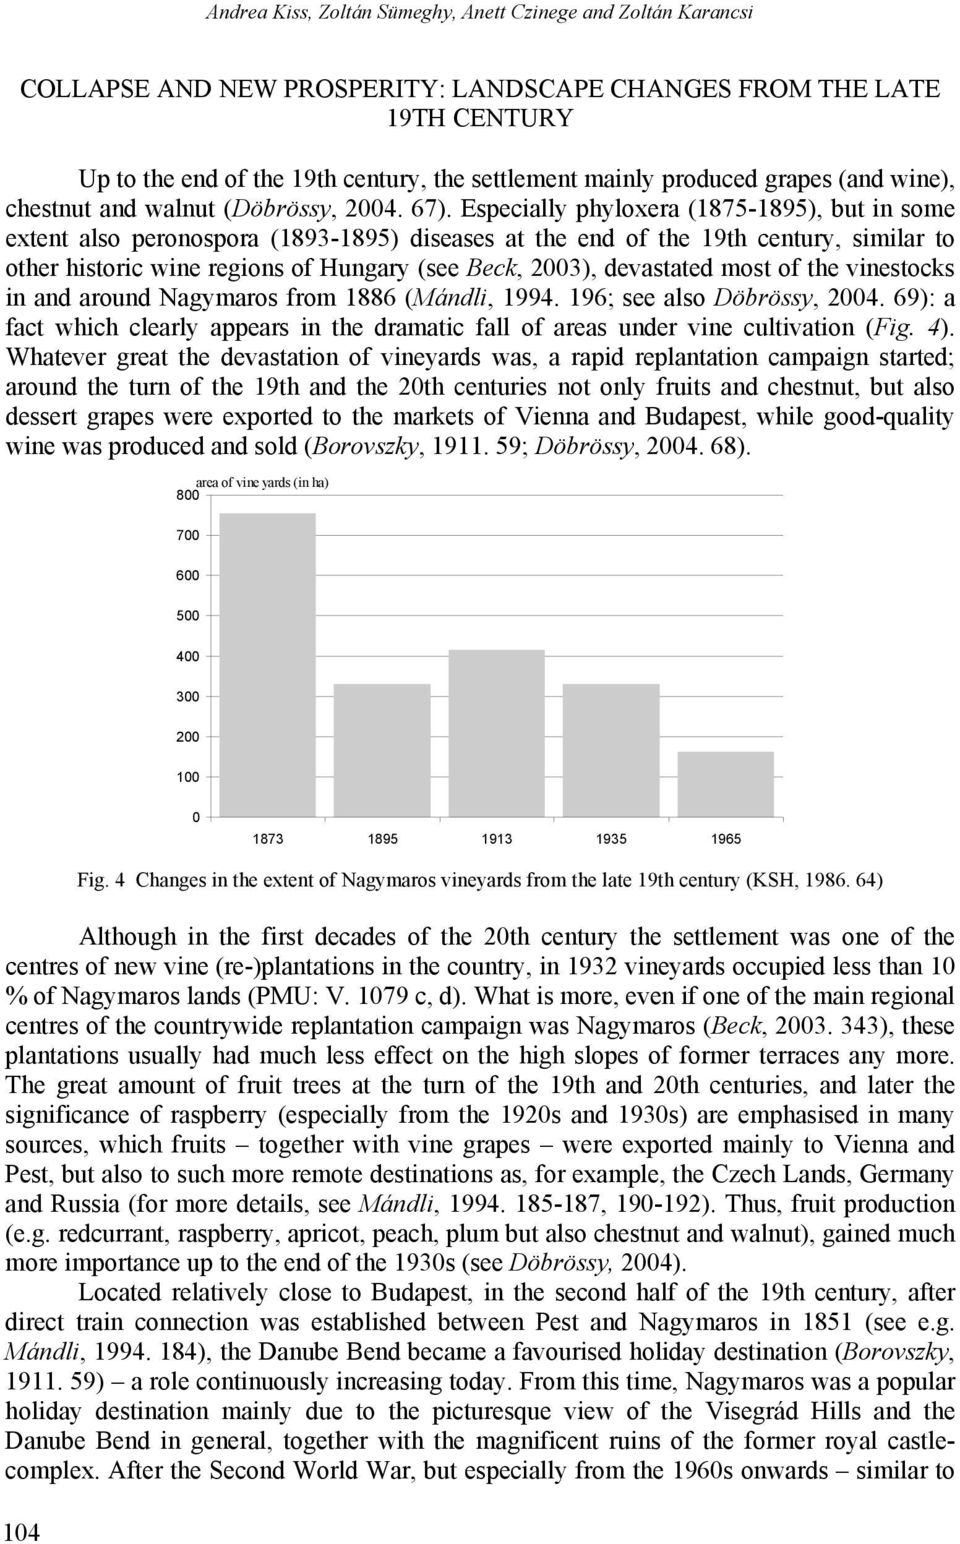 Especially phyloxera (1875-1895), but in some extent also peronospora (1893-1895) diseases at the end of the 19th century, similar to other historic wine regions of Hungary (see Beck, 2003),